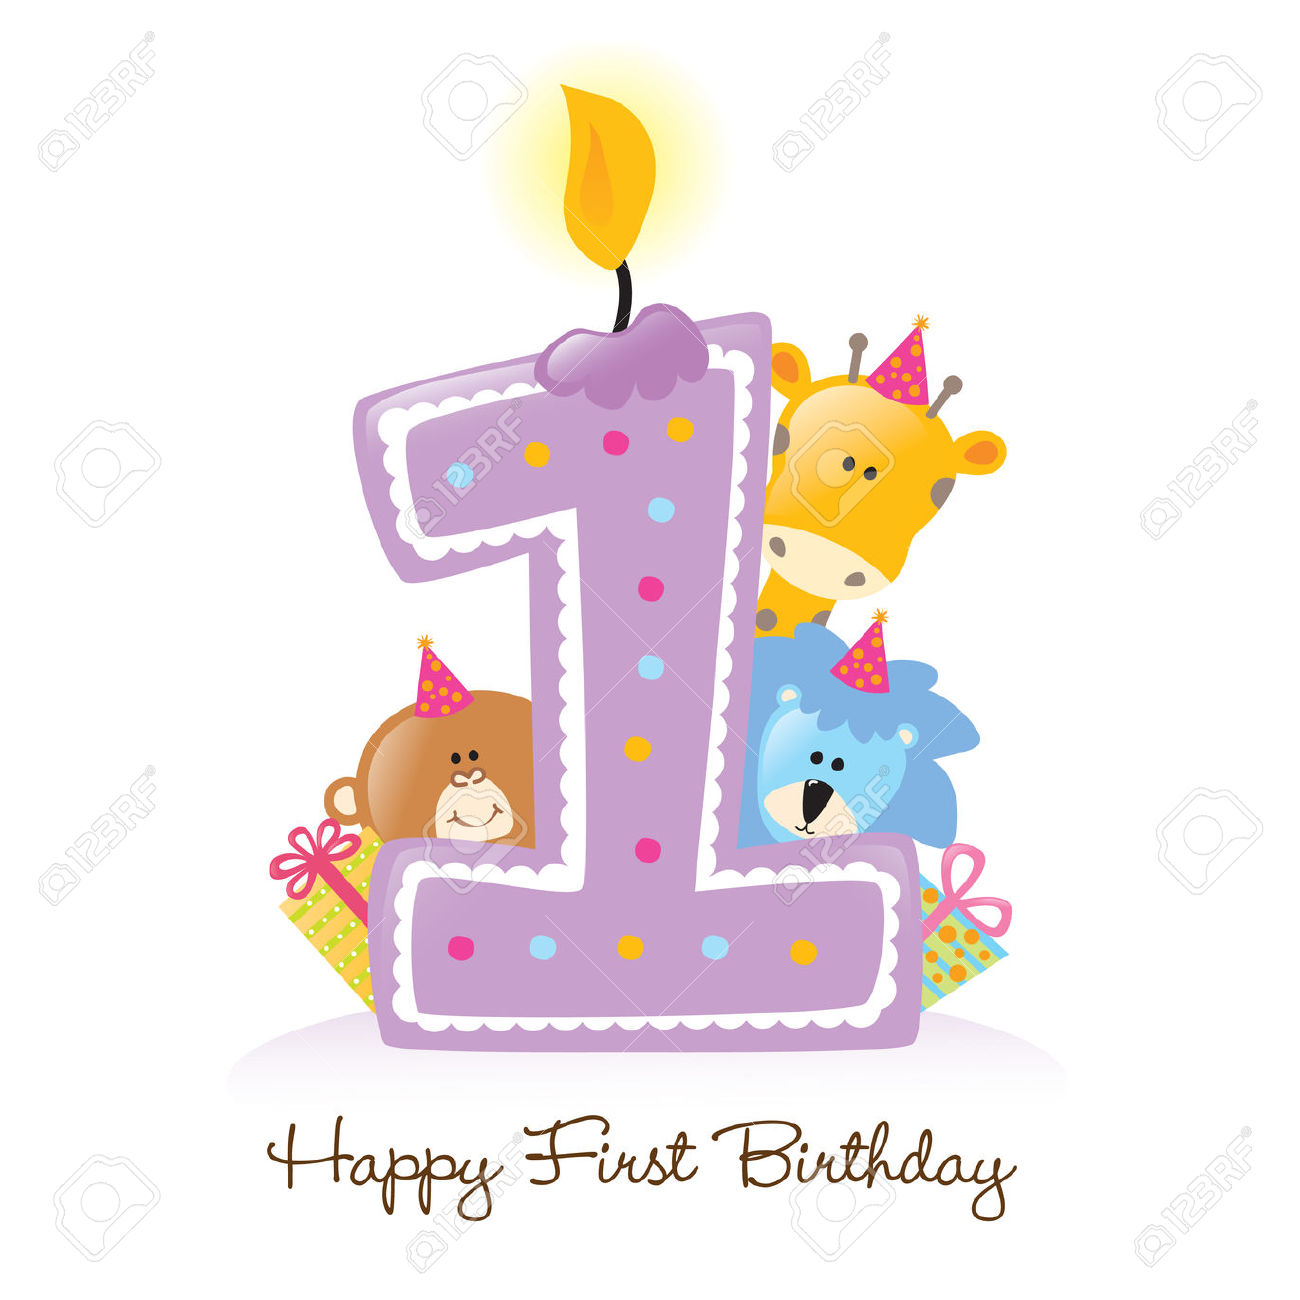 1st Birthday Free Clip Art. First Birthday Candle with .